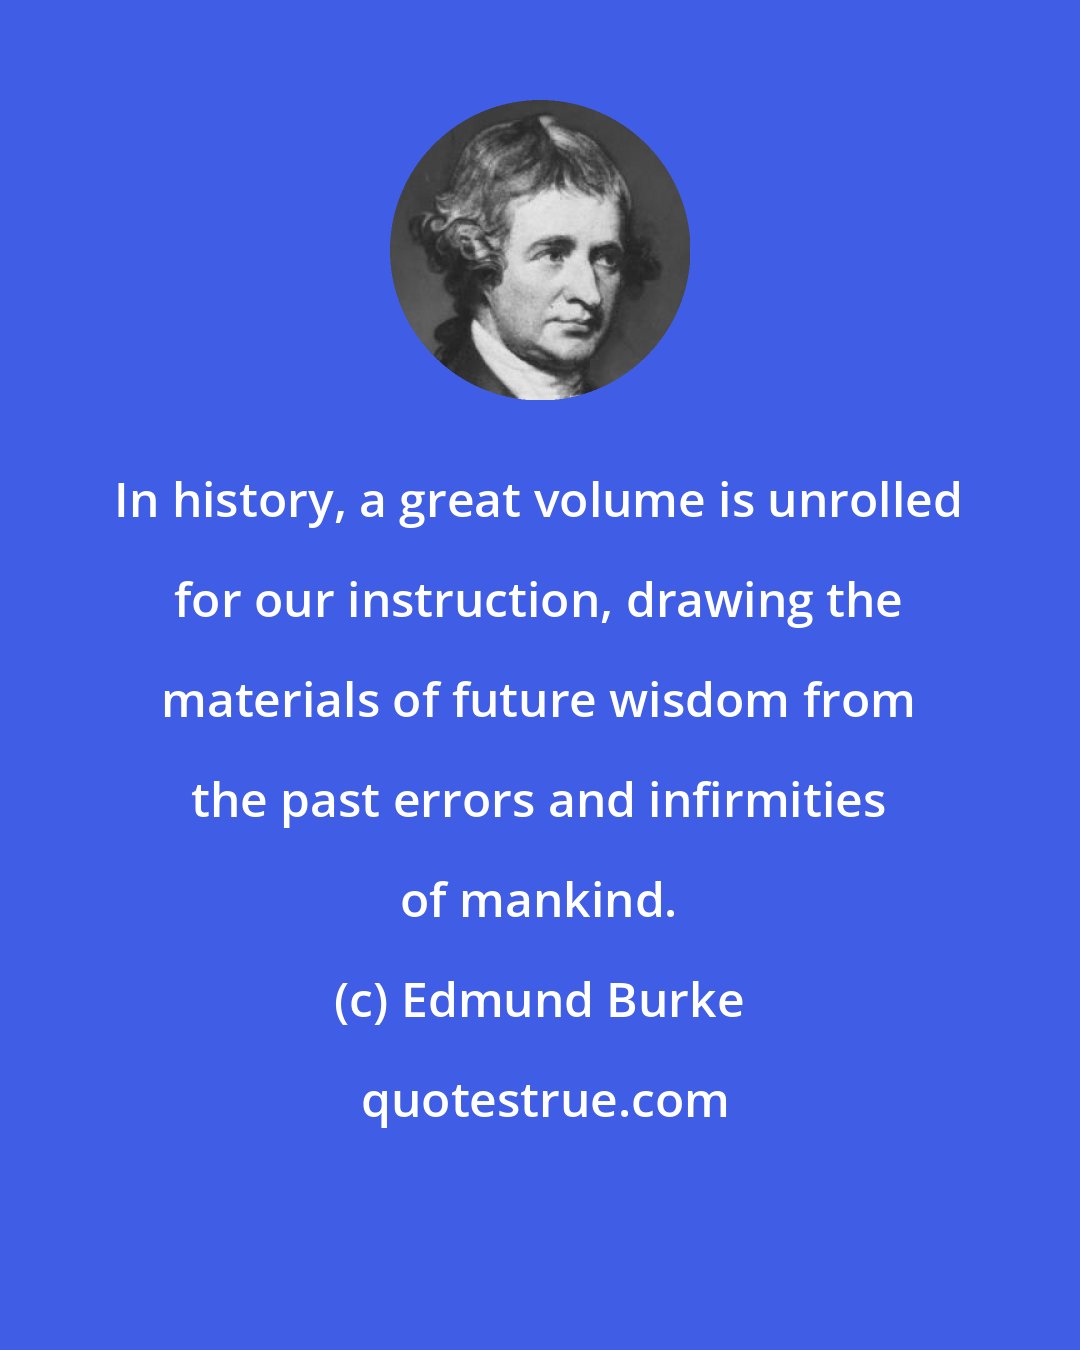 Edmund Burke: In history, a great volume is unrolled for our instruction, drawing the materials of future wisdom from the past errors and infirmities of mankind.